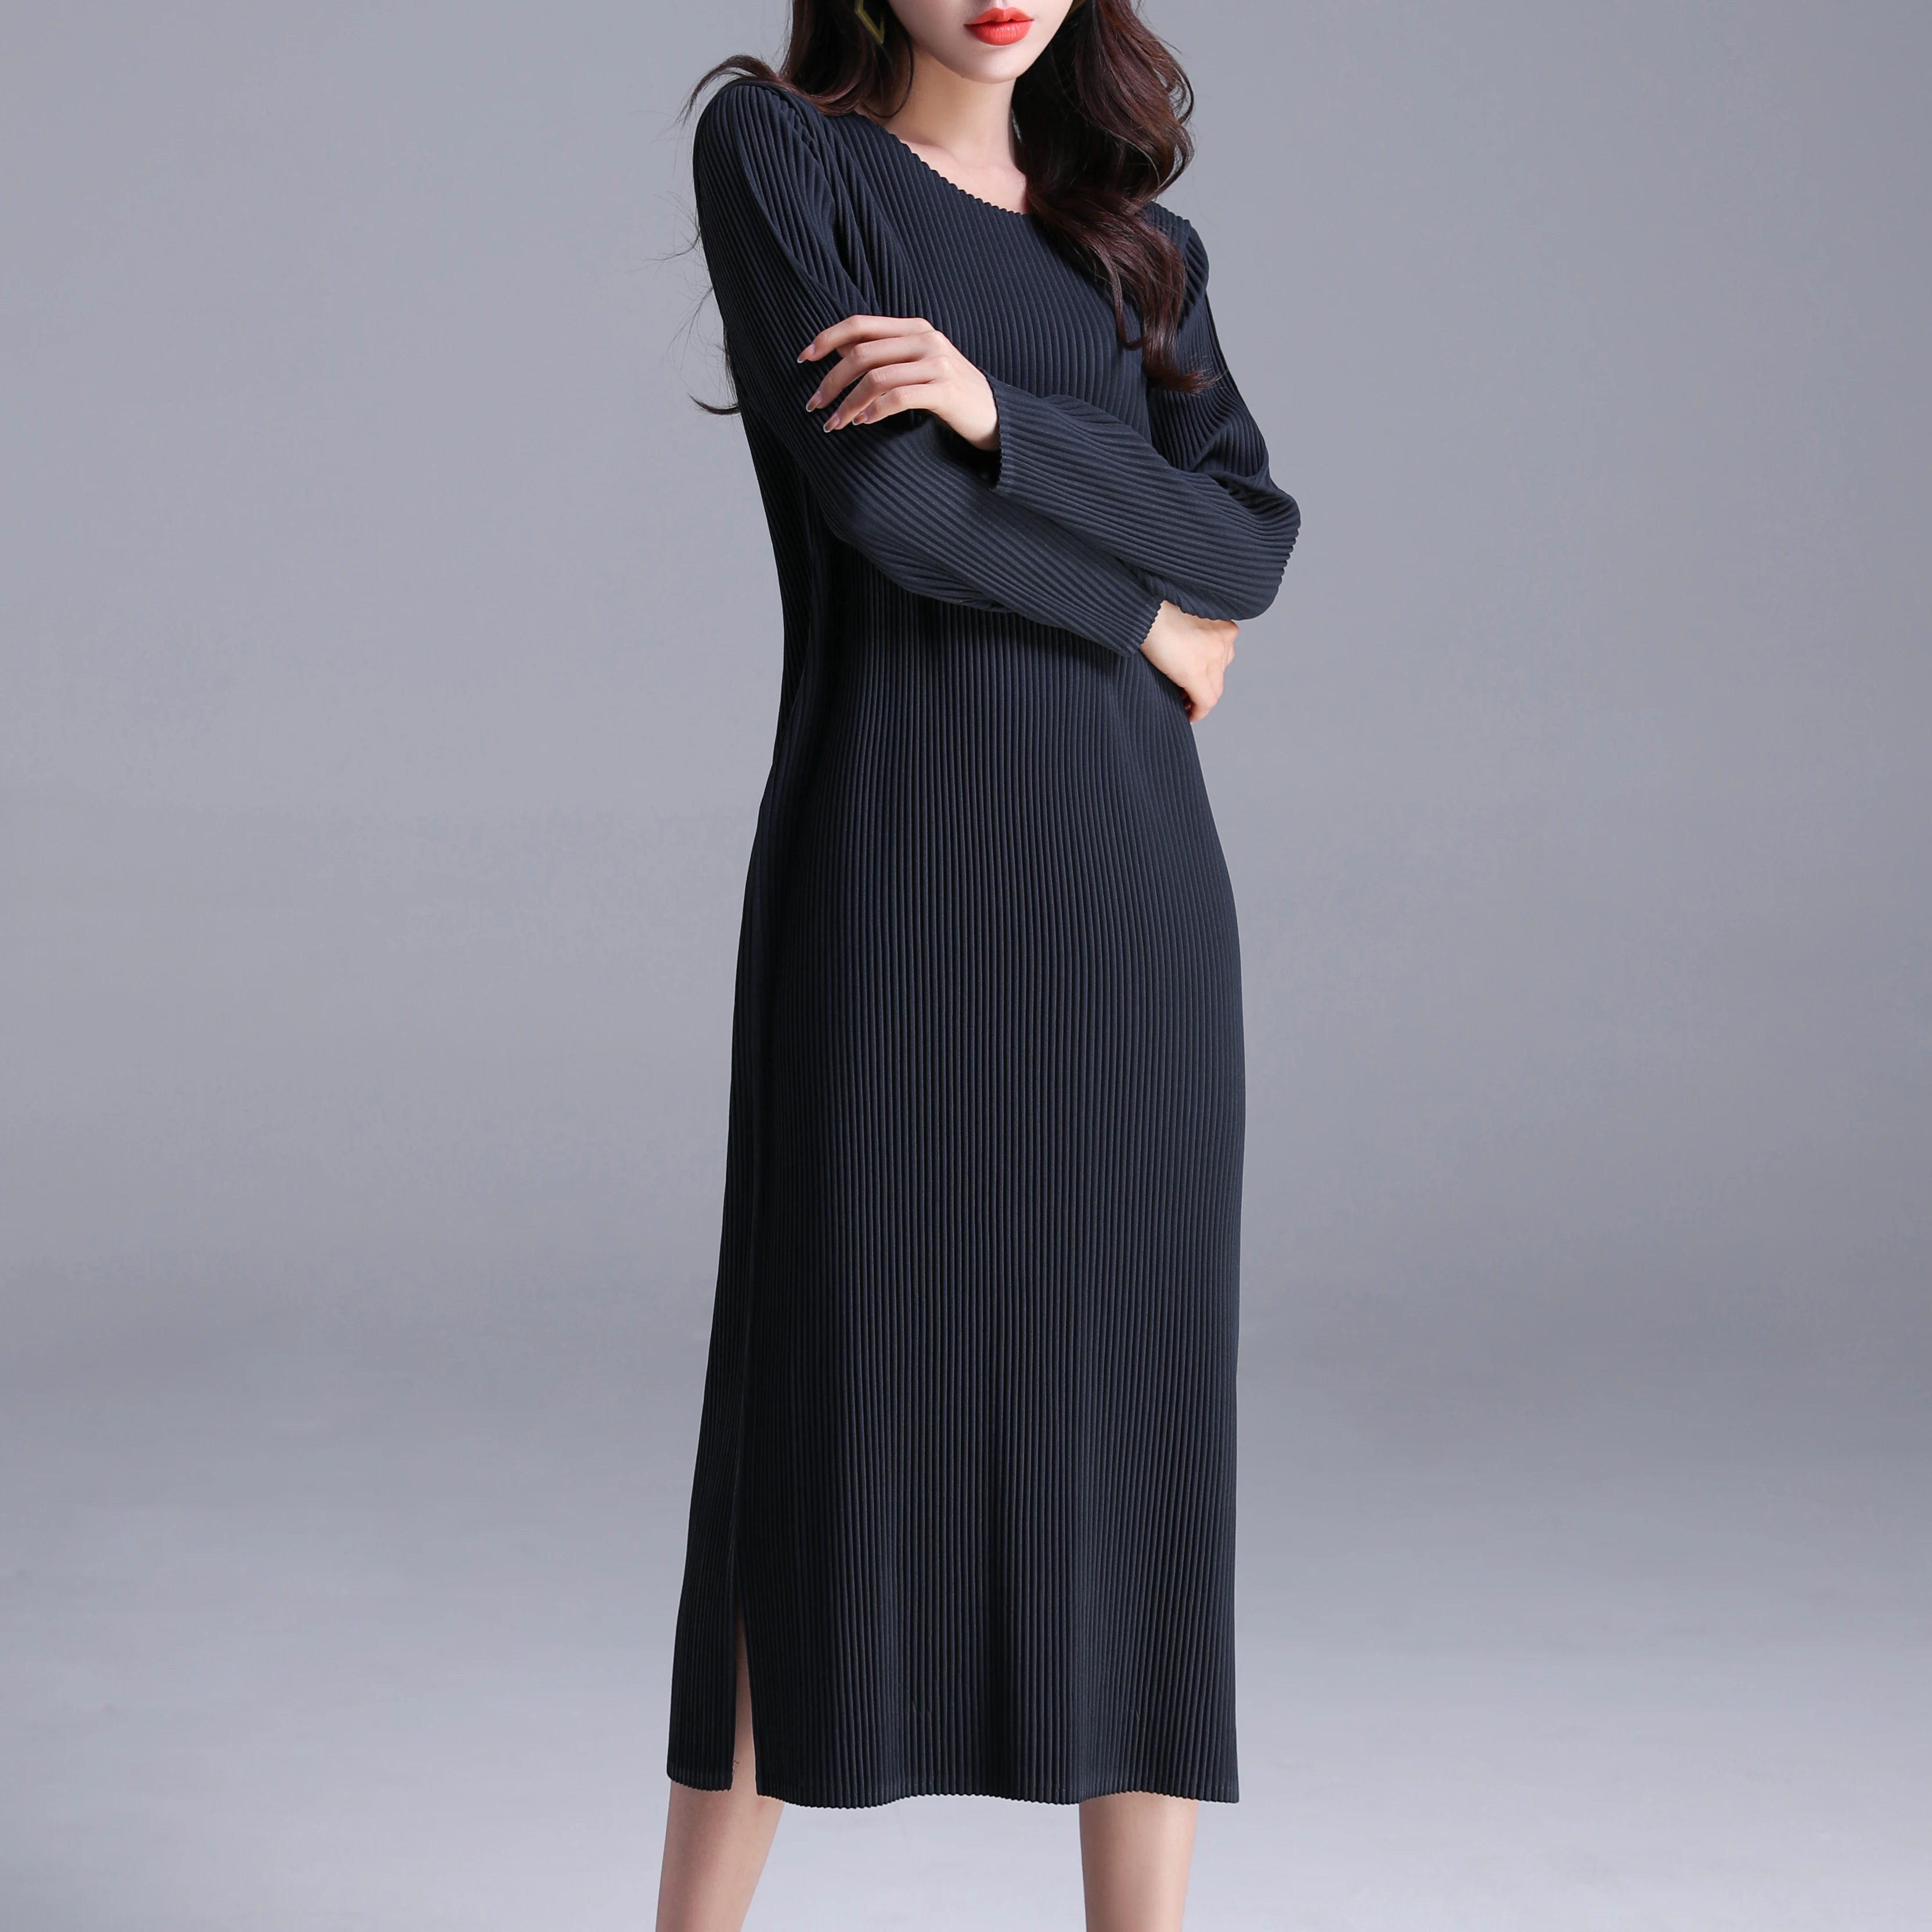 Authentic product 2020 Autumn spring Miyake pleated temperamentally age-reducing long-sleeved dresses can be worn for four seaso